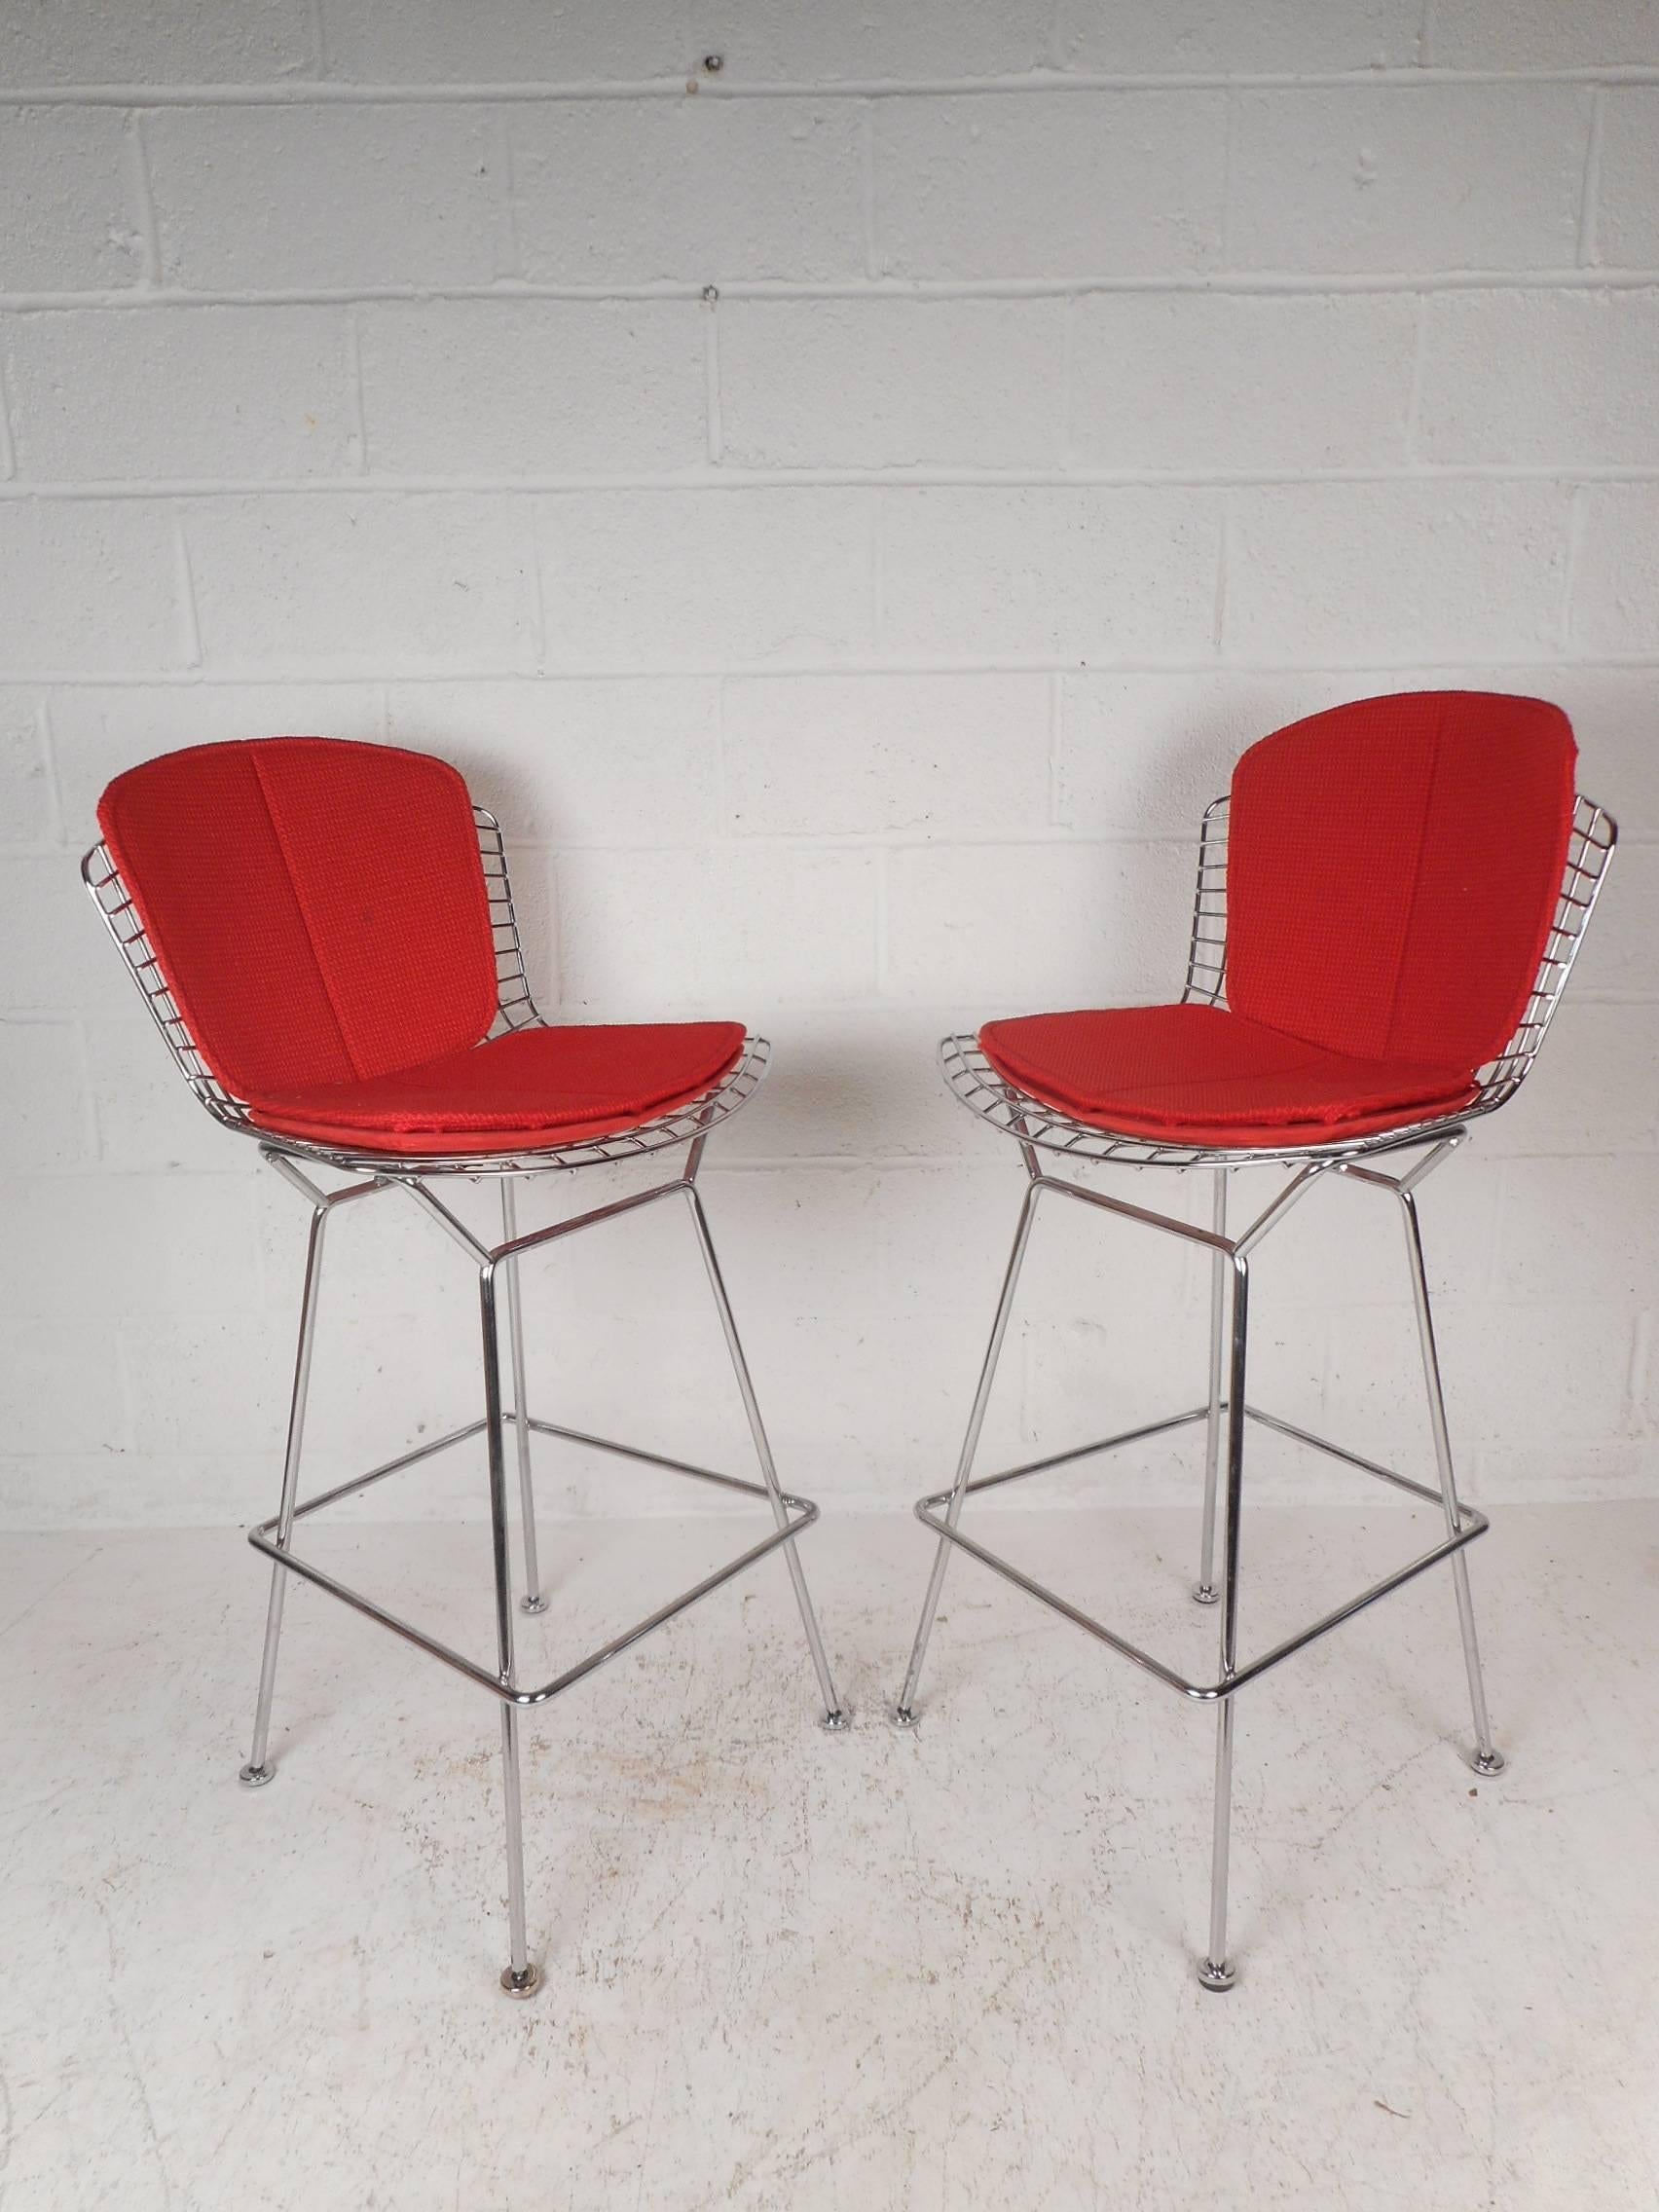 Stunning vintage modern bar stools with a metal wire frame and four splayed legs. These stylish chairs have two cushions on the seat covered in a plush elaborate red fabric. This extremely comfortable and sturdy pair of bar stools make the perfect